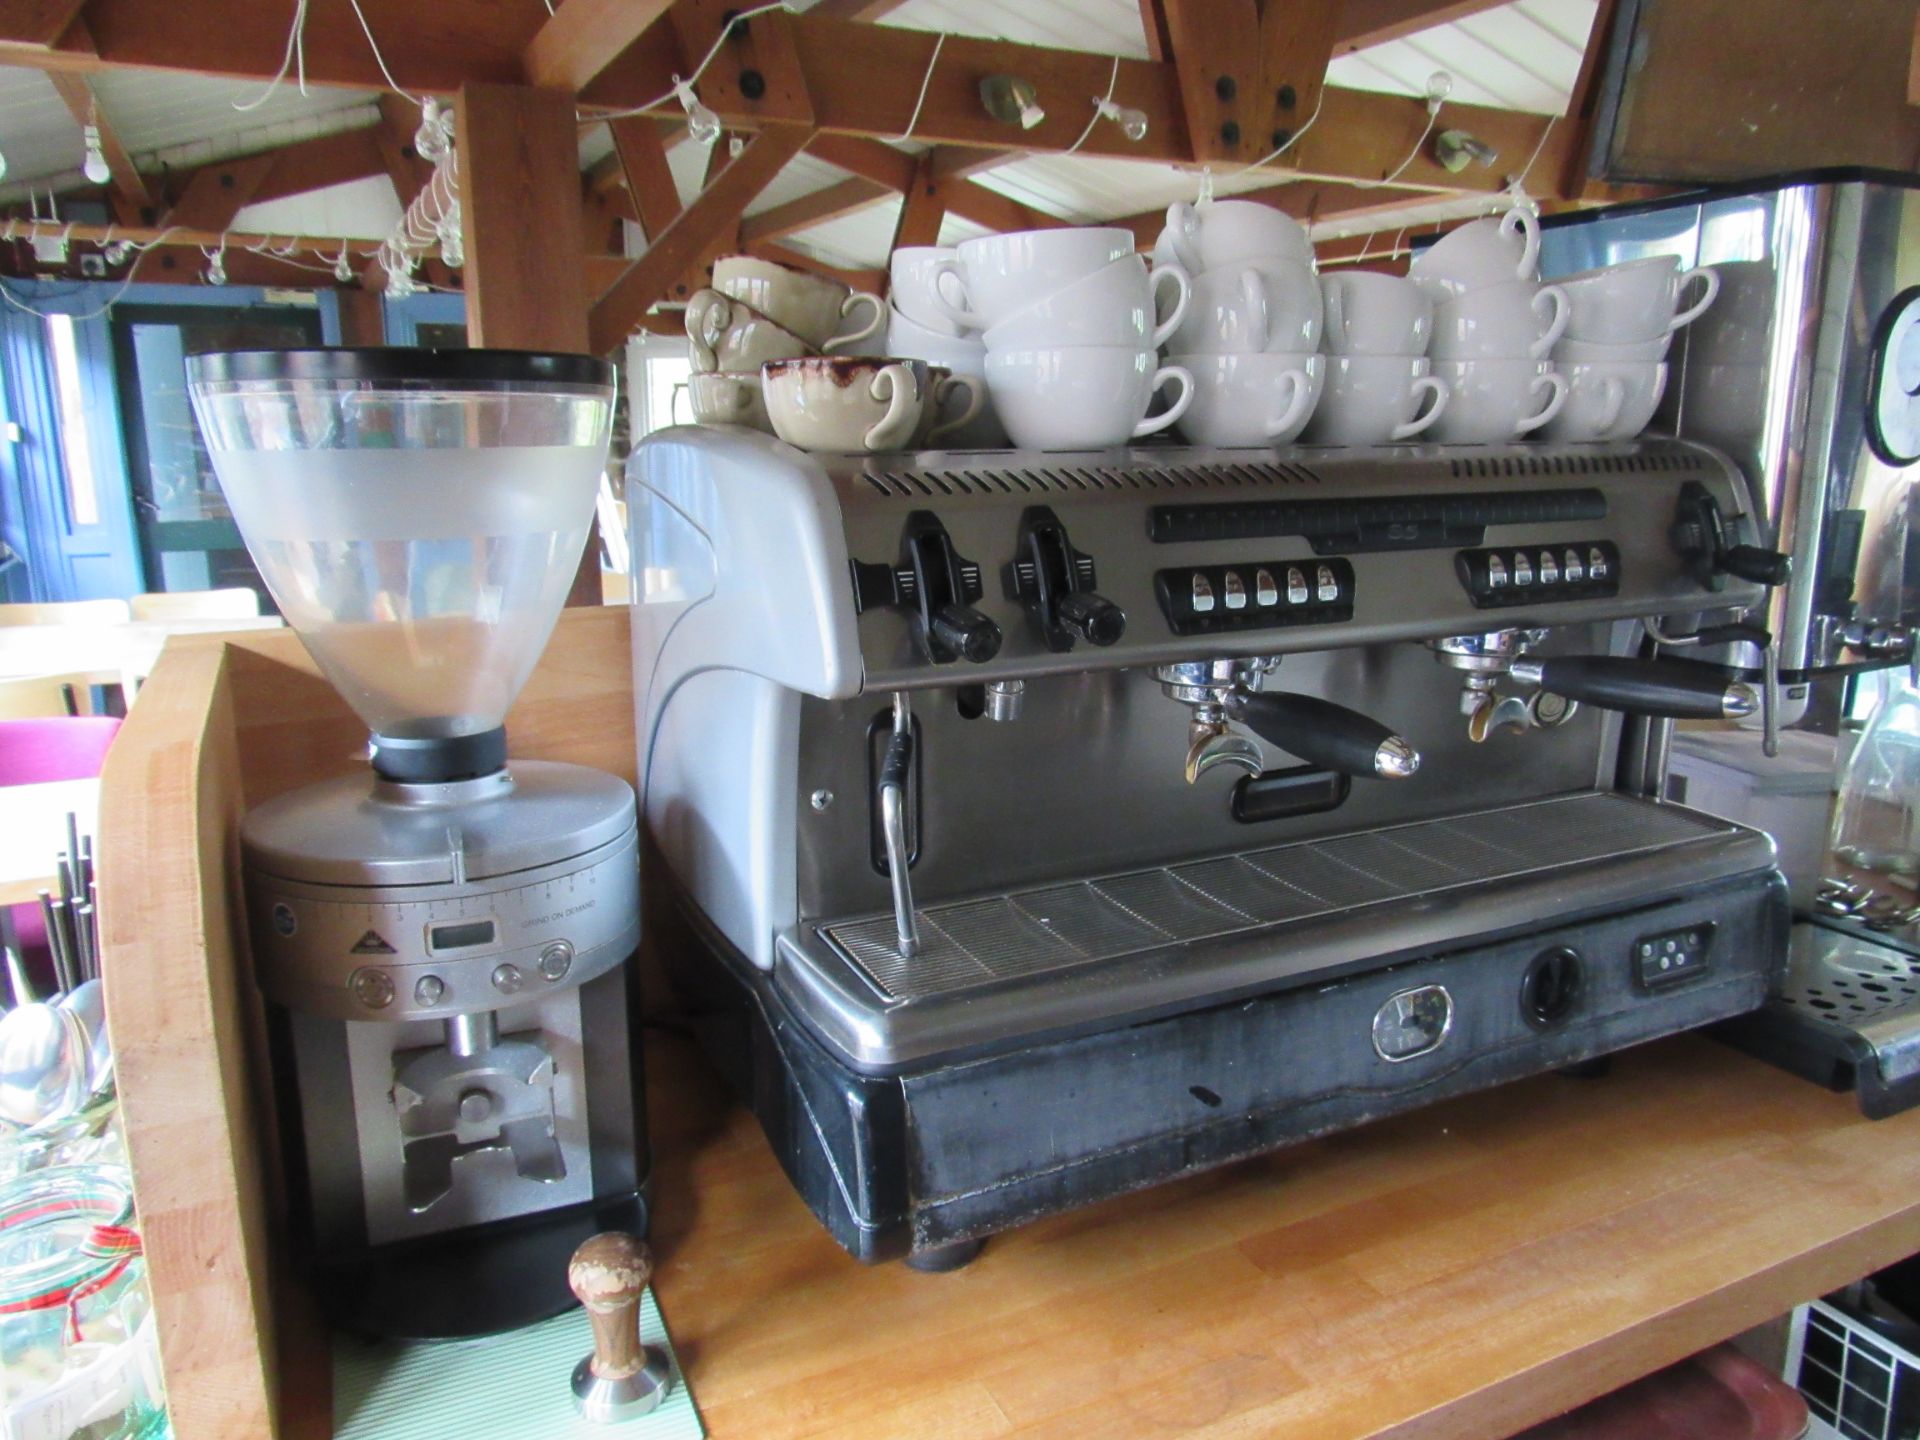 2 cup espresso station with Mahlkonig coffee grinder - Image 2 of 2